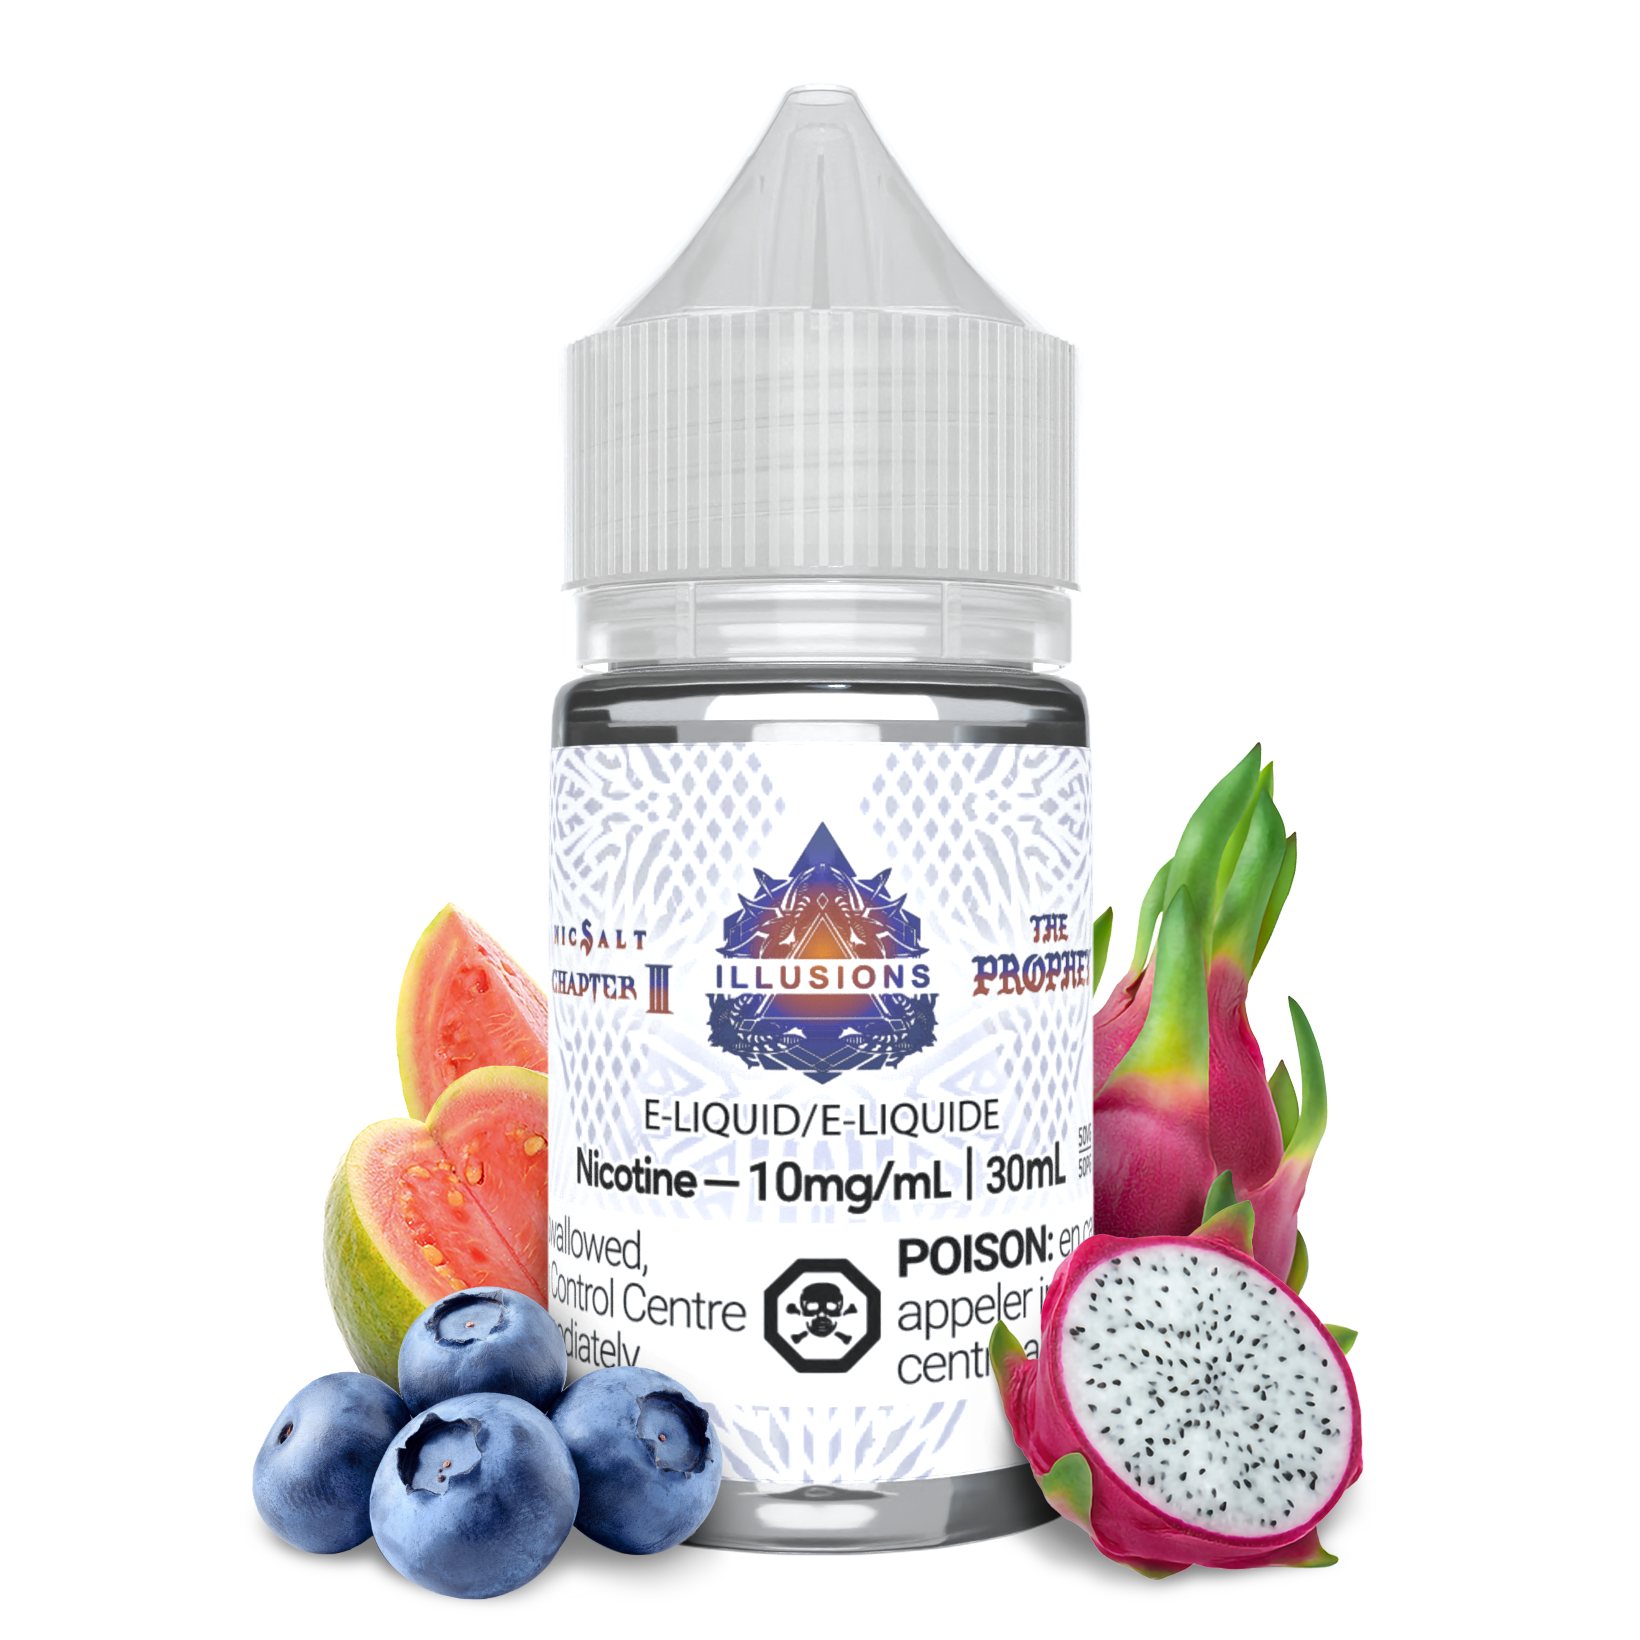 30 mL bottle of The Prophet E-Liquid by Illusions Vapor which is a freebase vape juice that comes in different nicotine strength, the prophet is a fruity mix of guava, dragonfruit, and blueberries